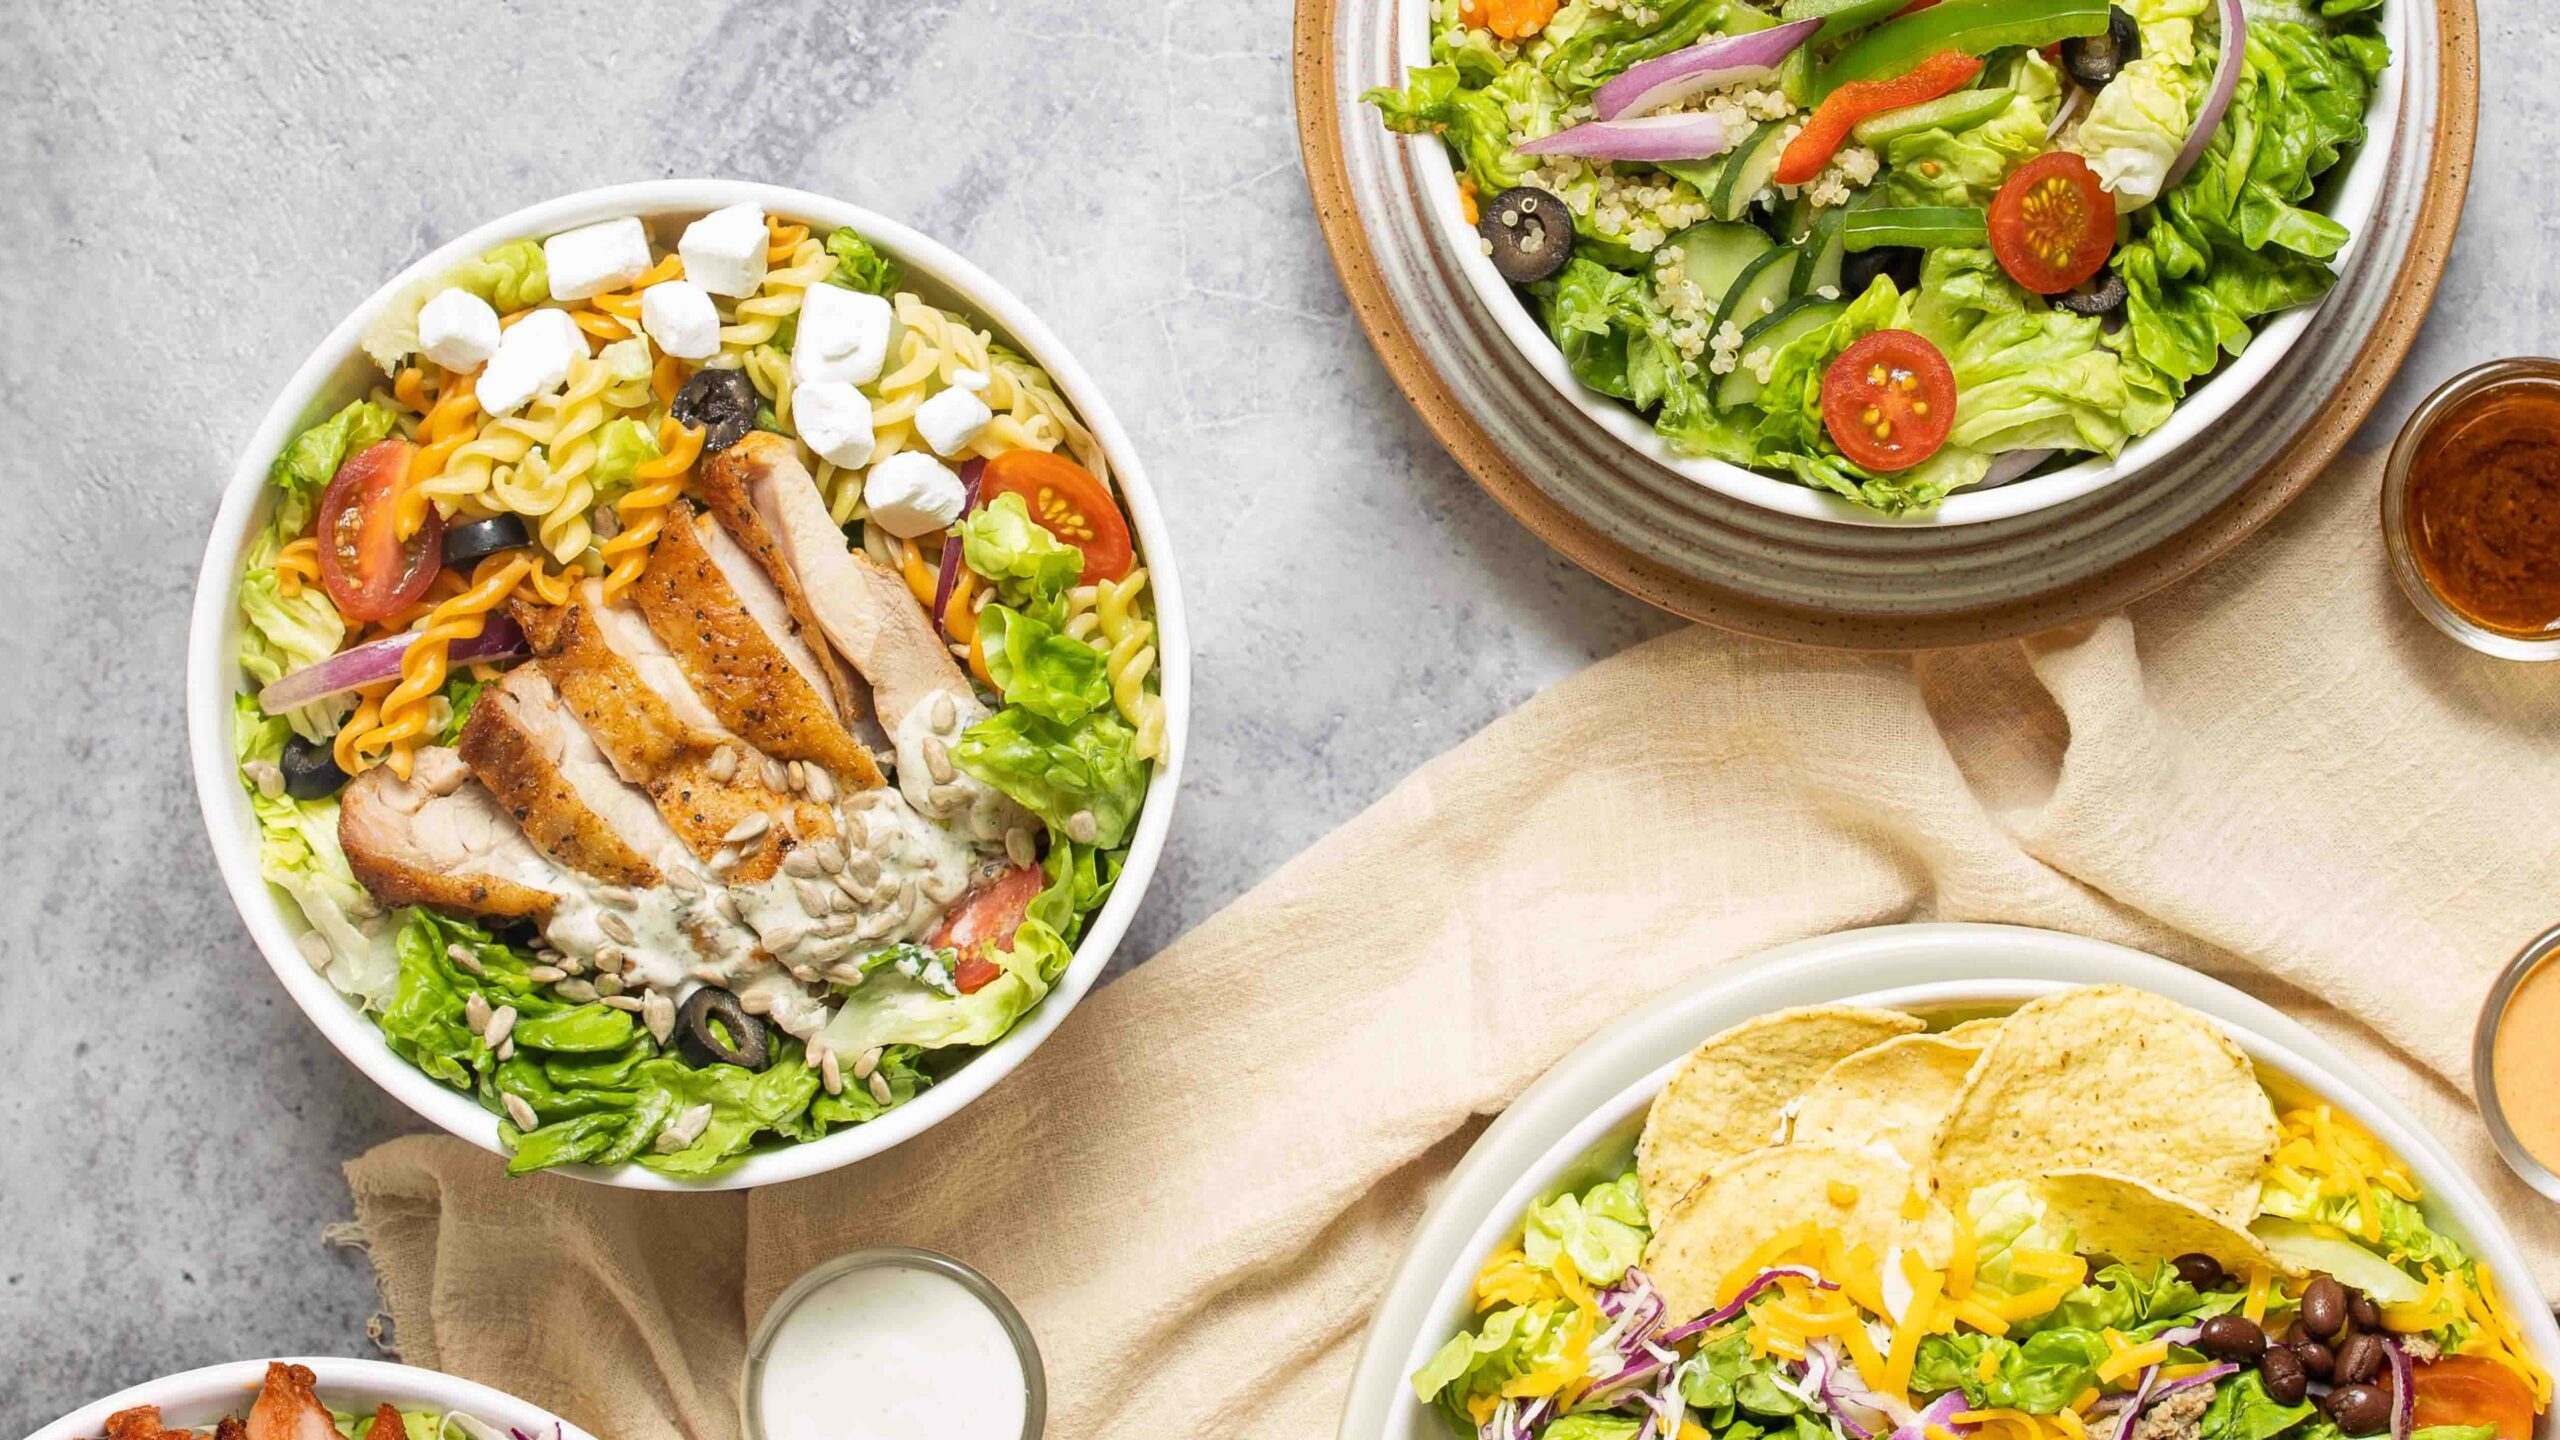 Go green with SaladStop’s 2 new salad bowls